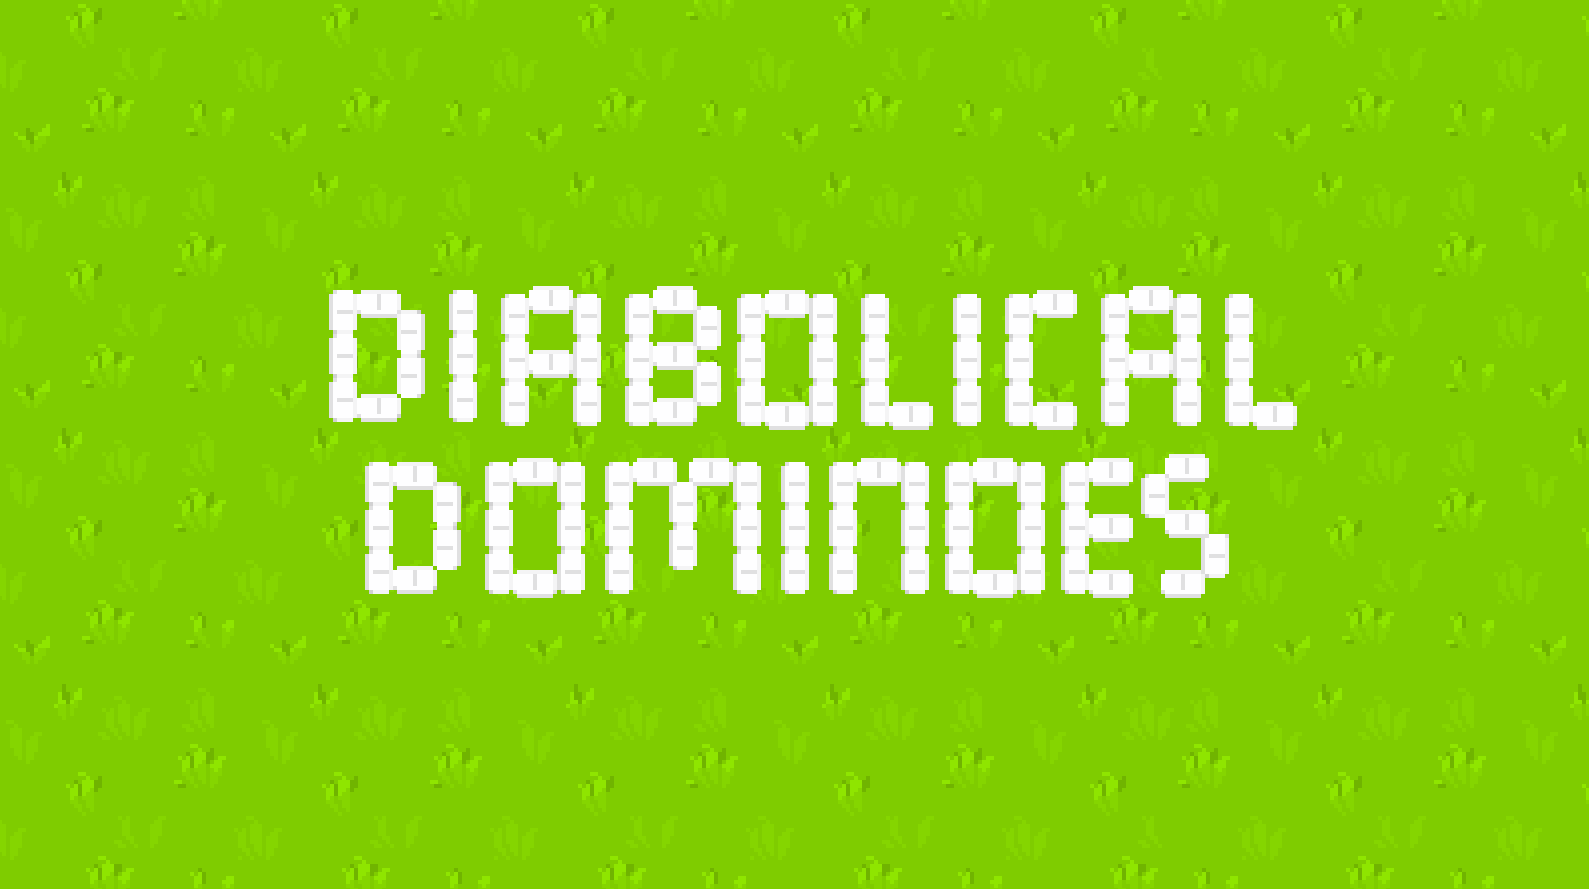 Diabolical Dominoes Text over Grass